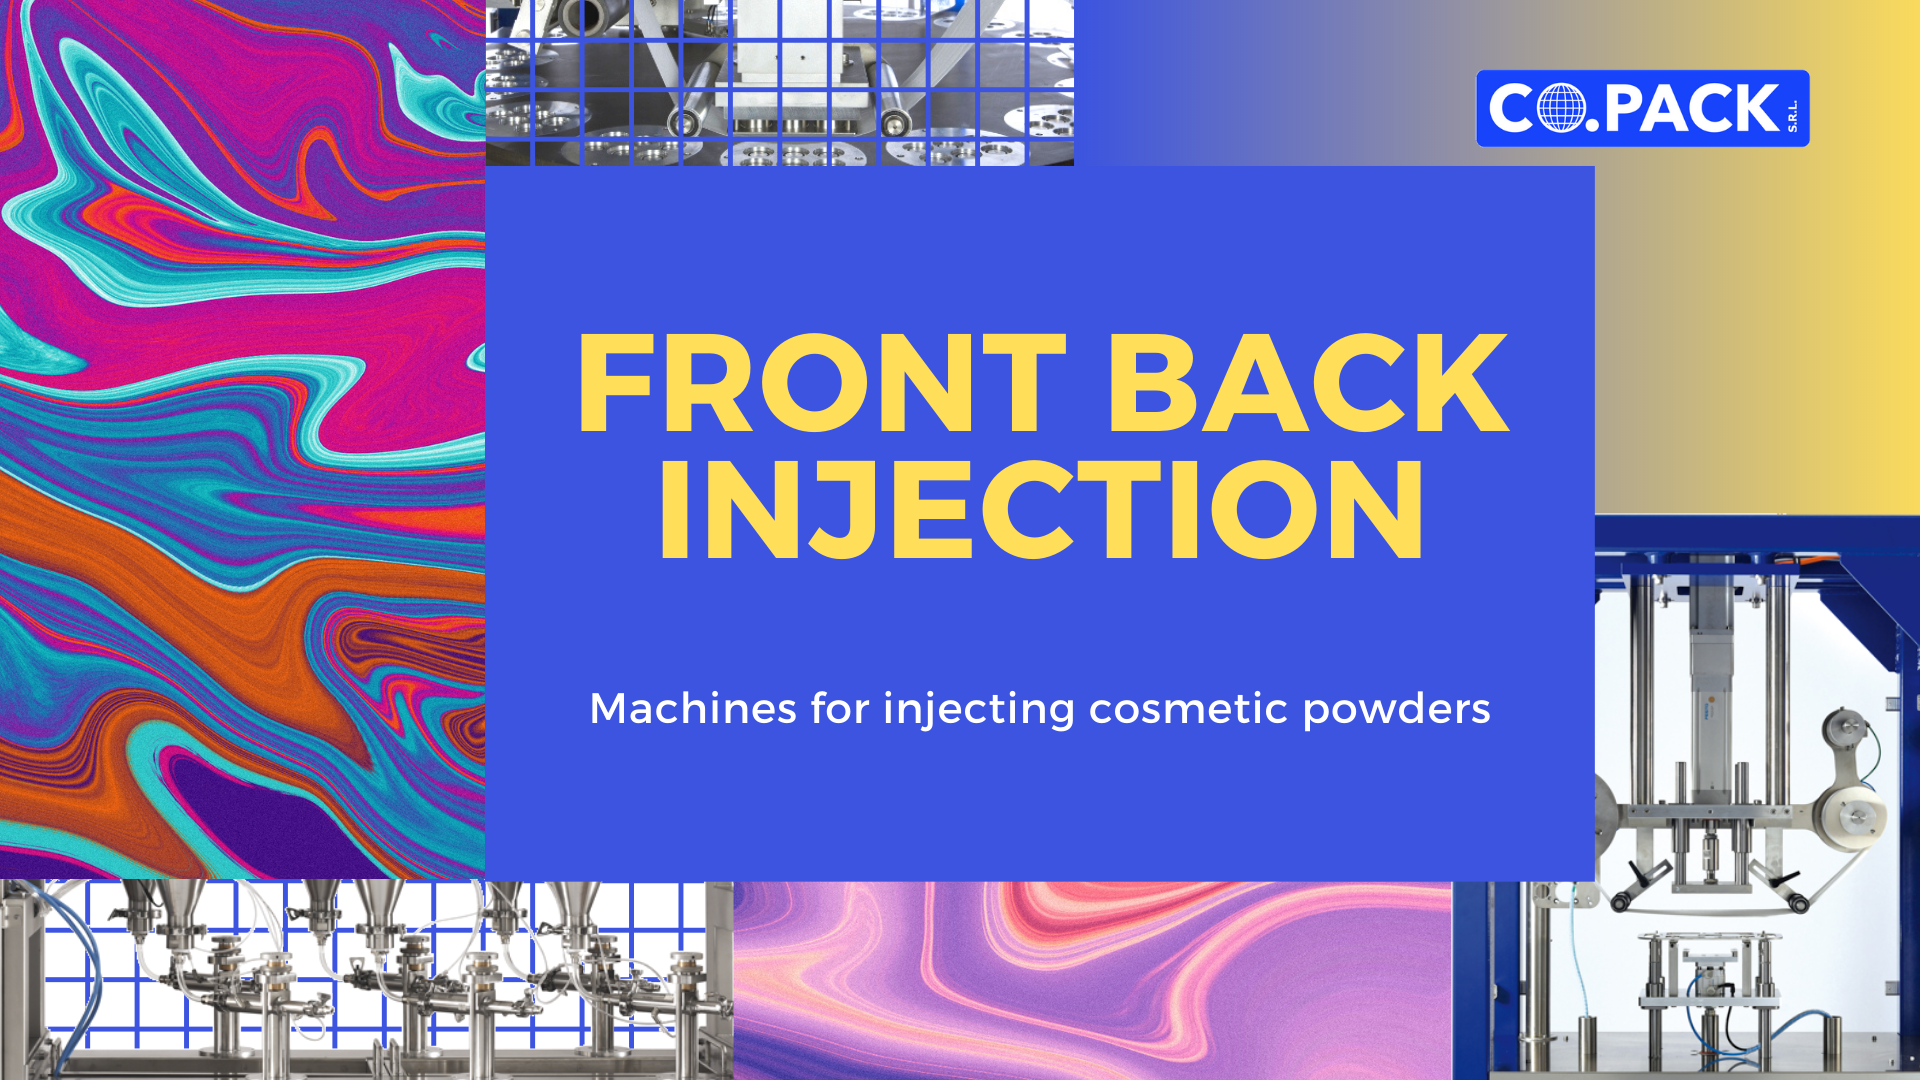 _FRONT_BACK_INJECTION_eng